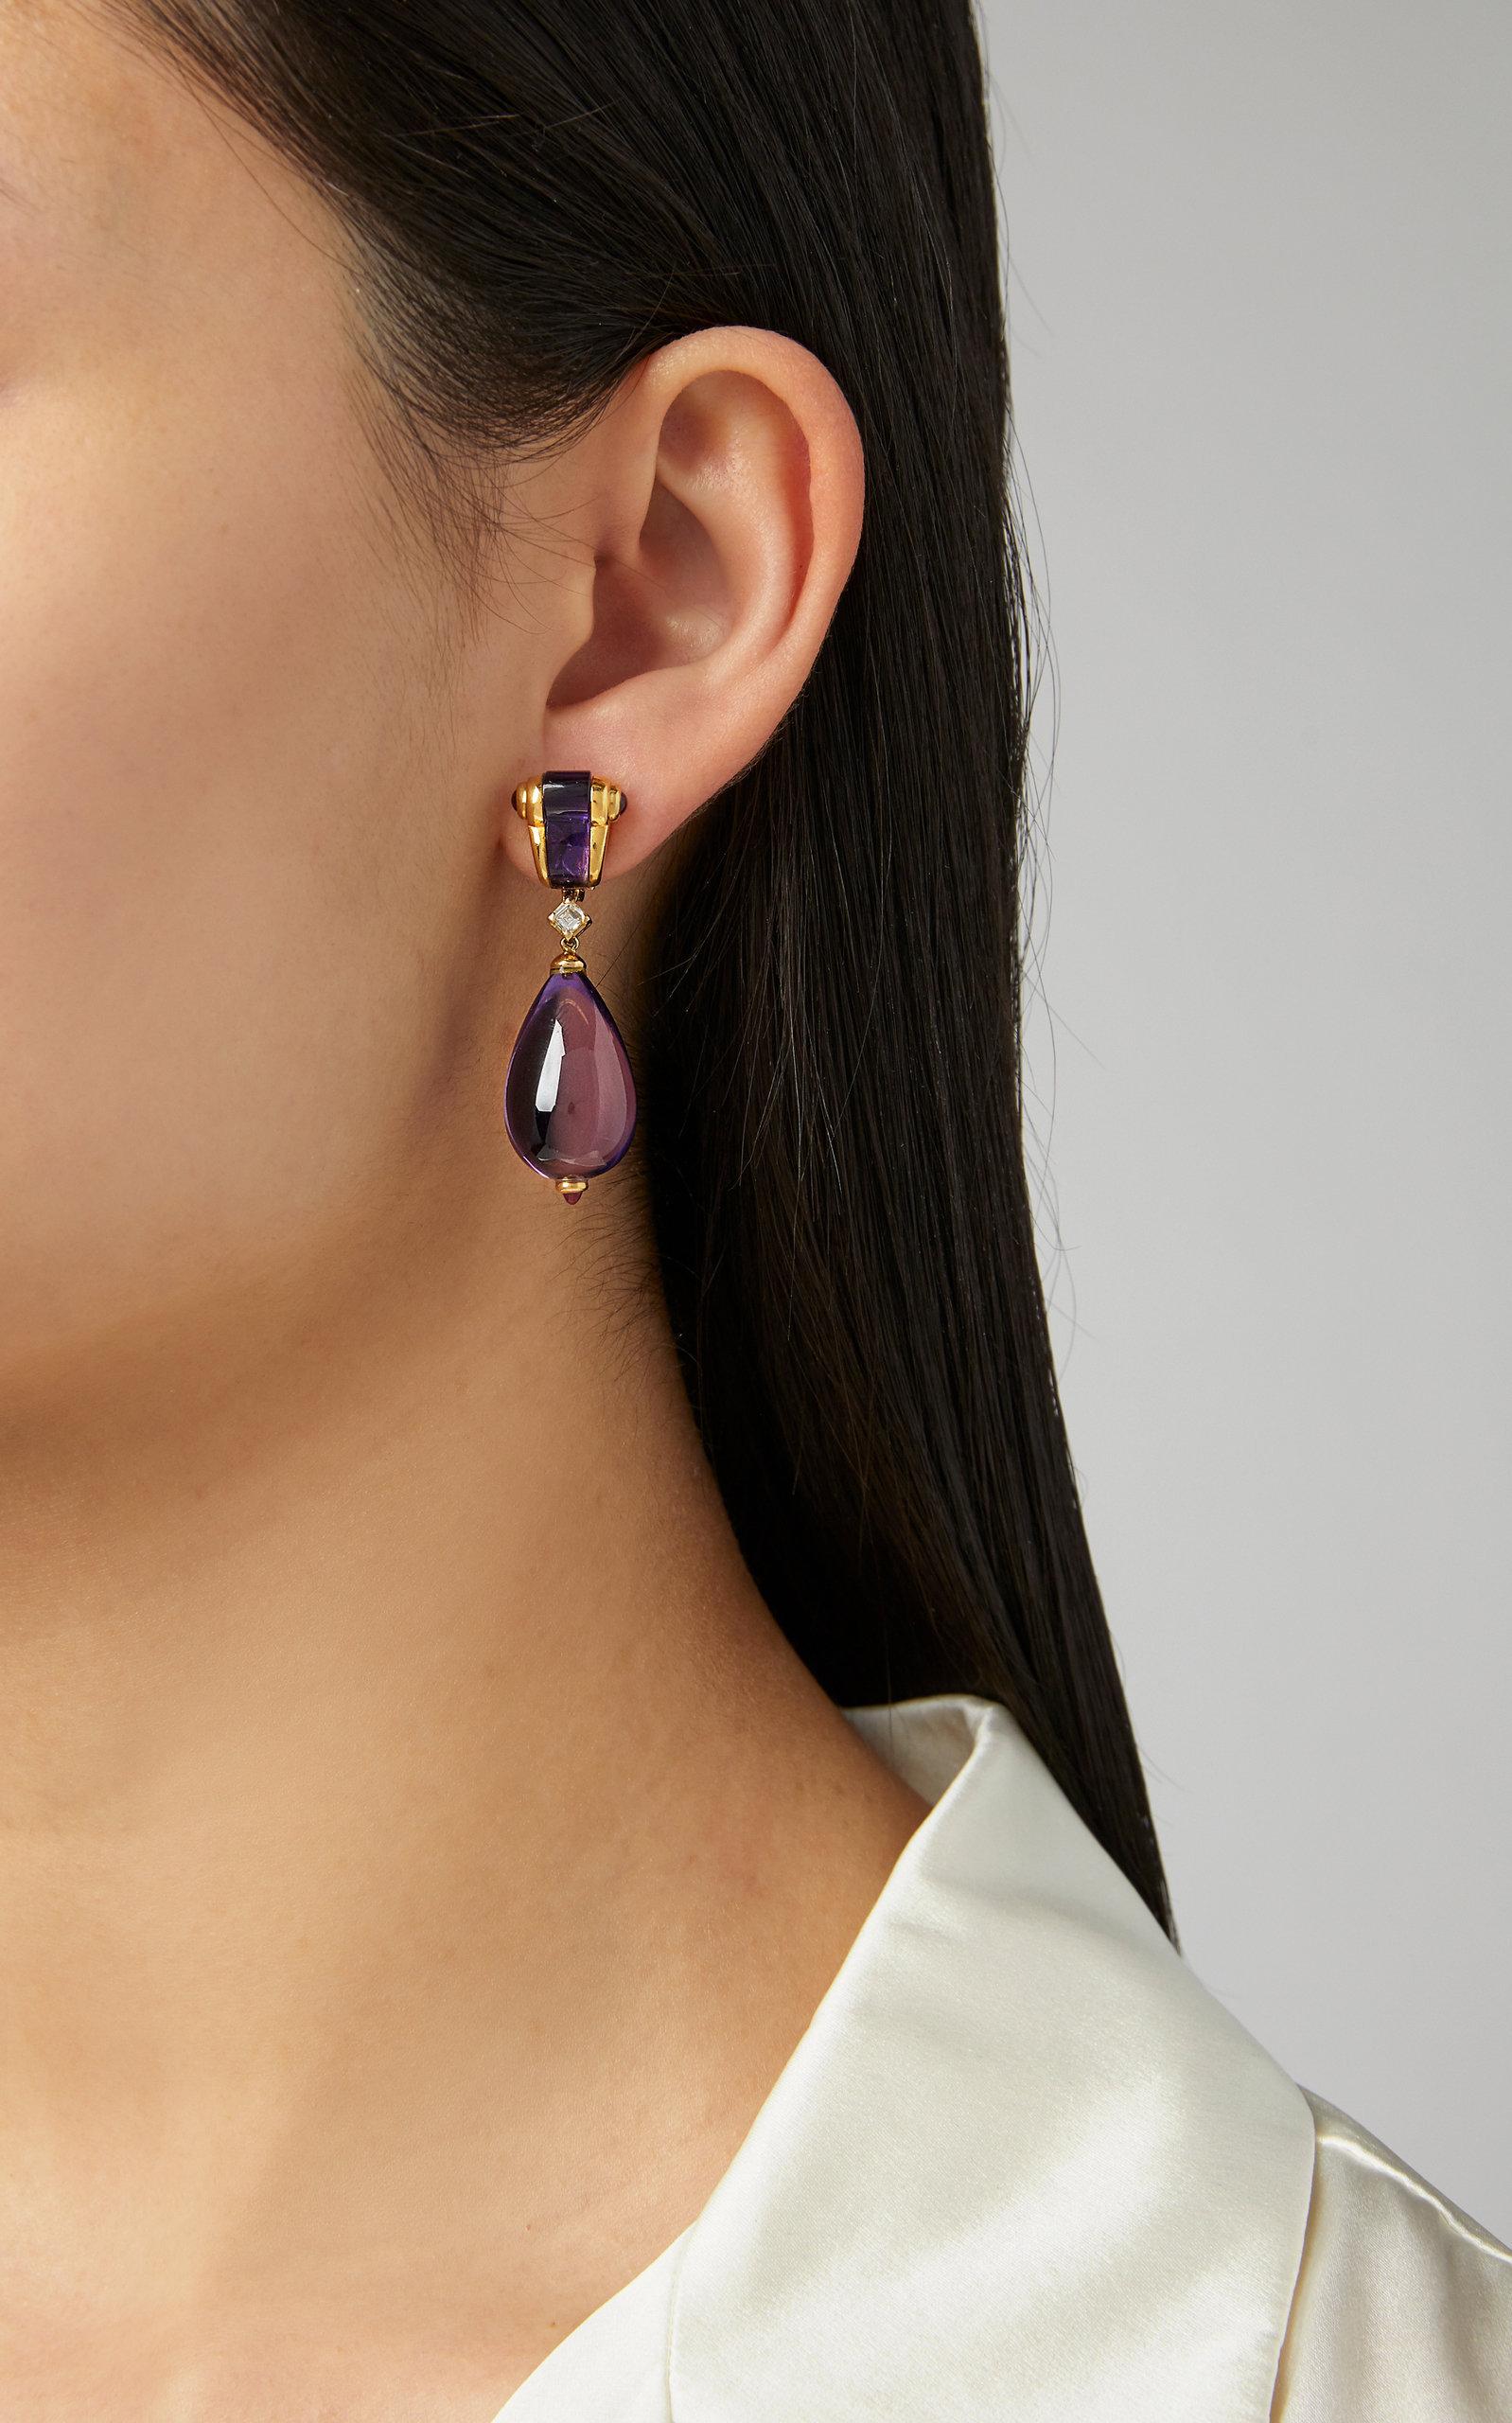 Bulgari ear-pendants in 18kt yellow gold with fine amethyst drops, diamonds and cabochon rubies.  Italy, circa 1980s.